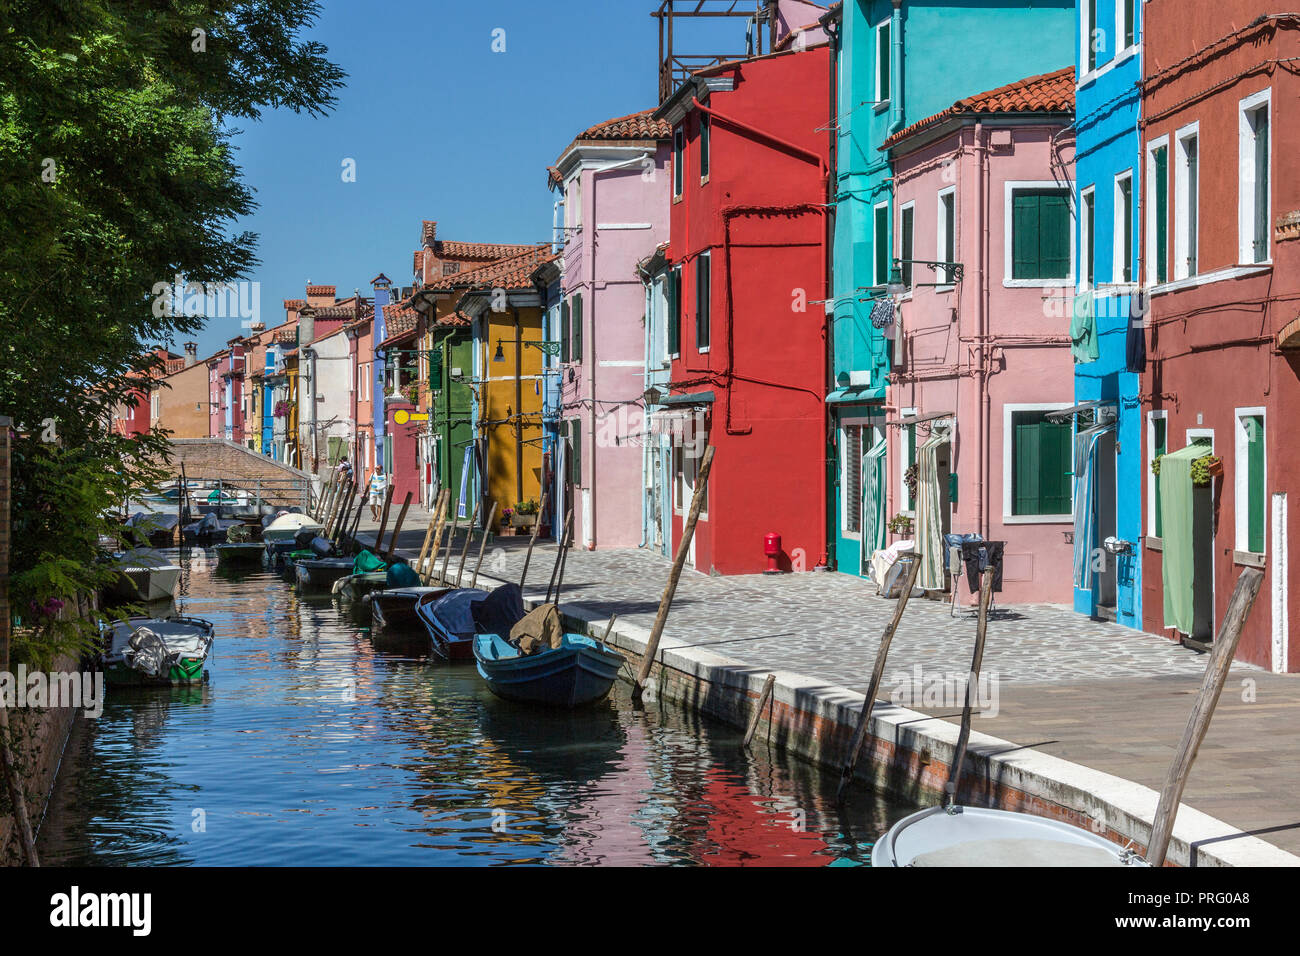 The island of Burano in the Venetian Lagoon, near Venice, Italy. Known for  its lace work and brightly colored houses Stock Photo - Alamy